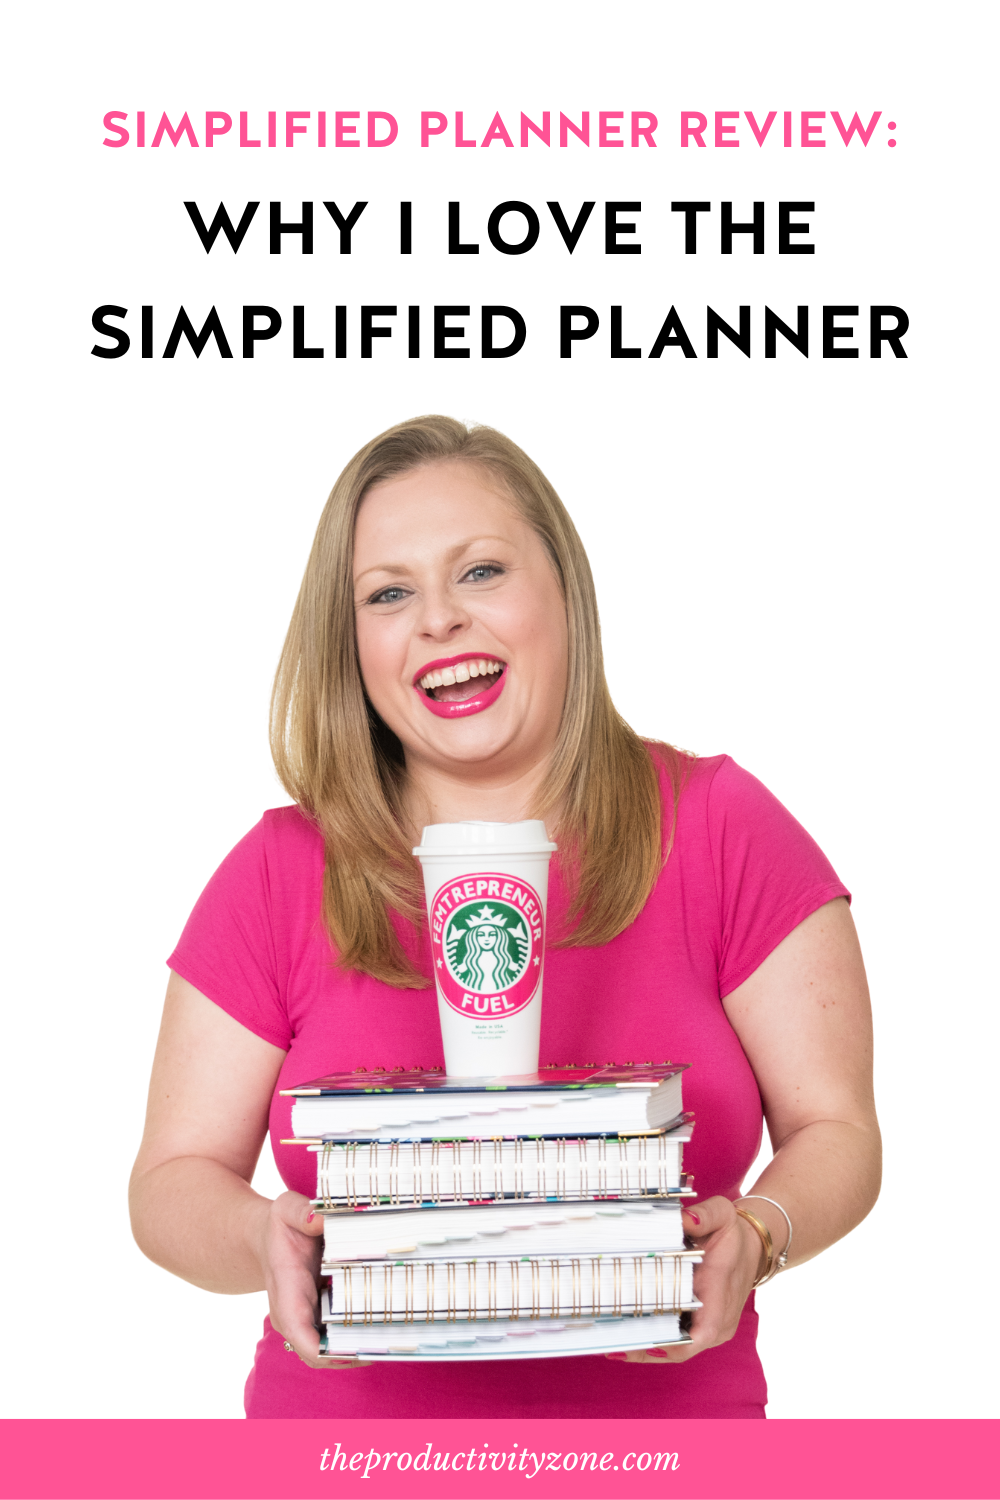 Alexandra of The Productivity Zone holding a stack of Simplified Planners